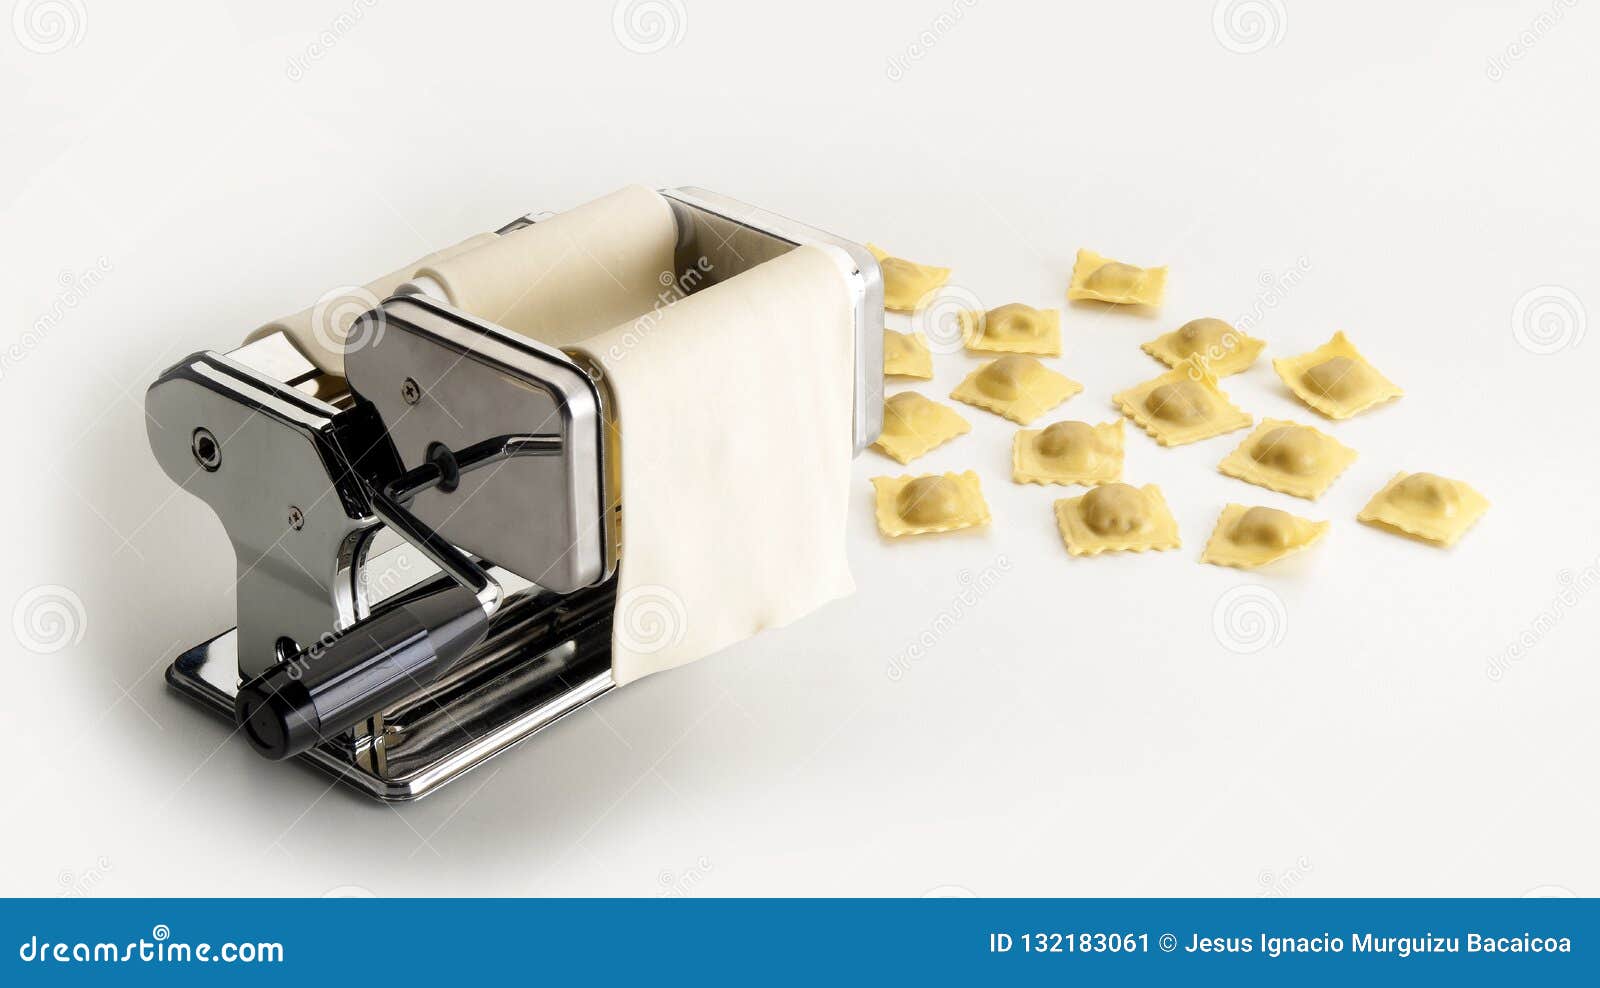 stainless steel machine to flatten, fill and cut italian pasta next to some ravioli samples